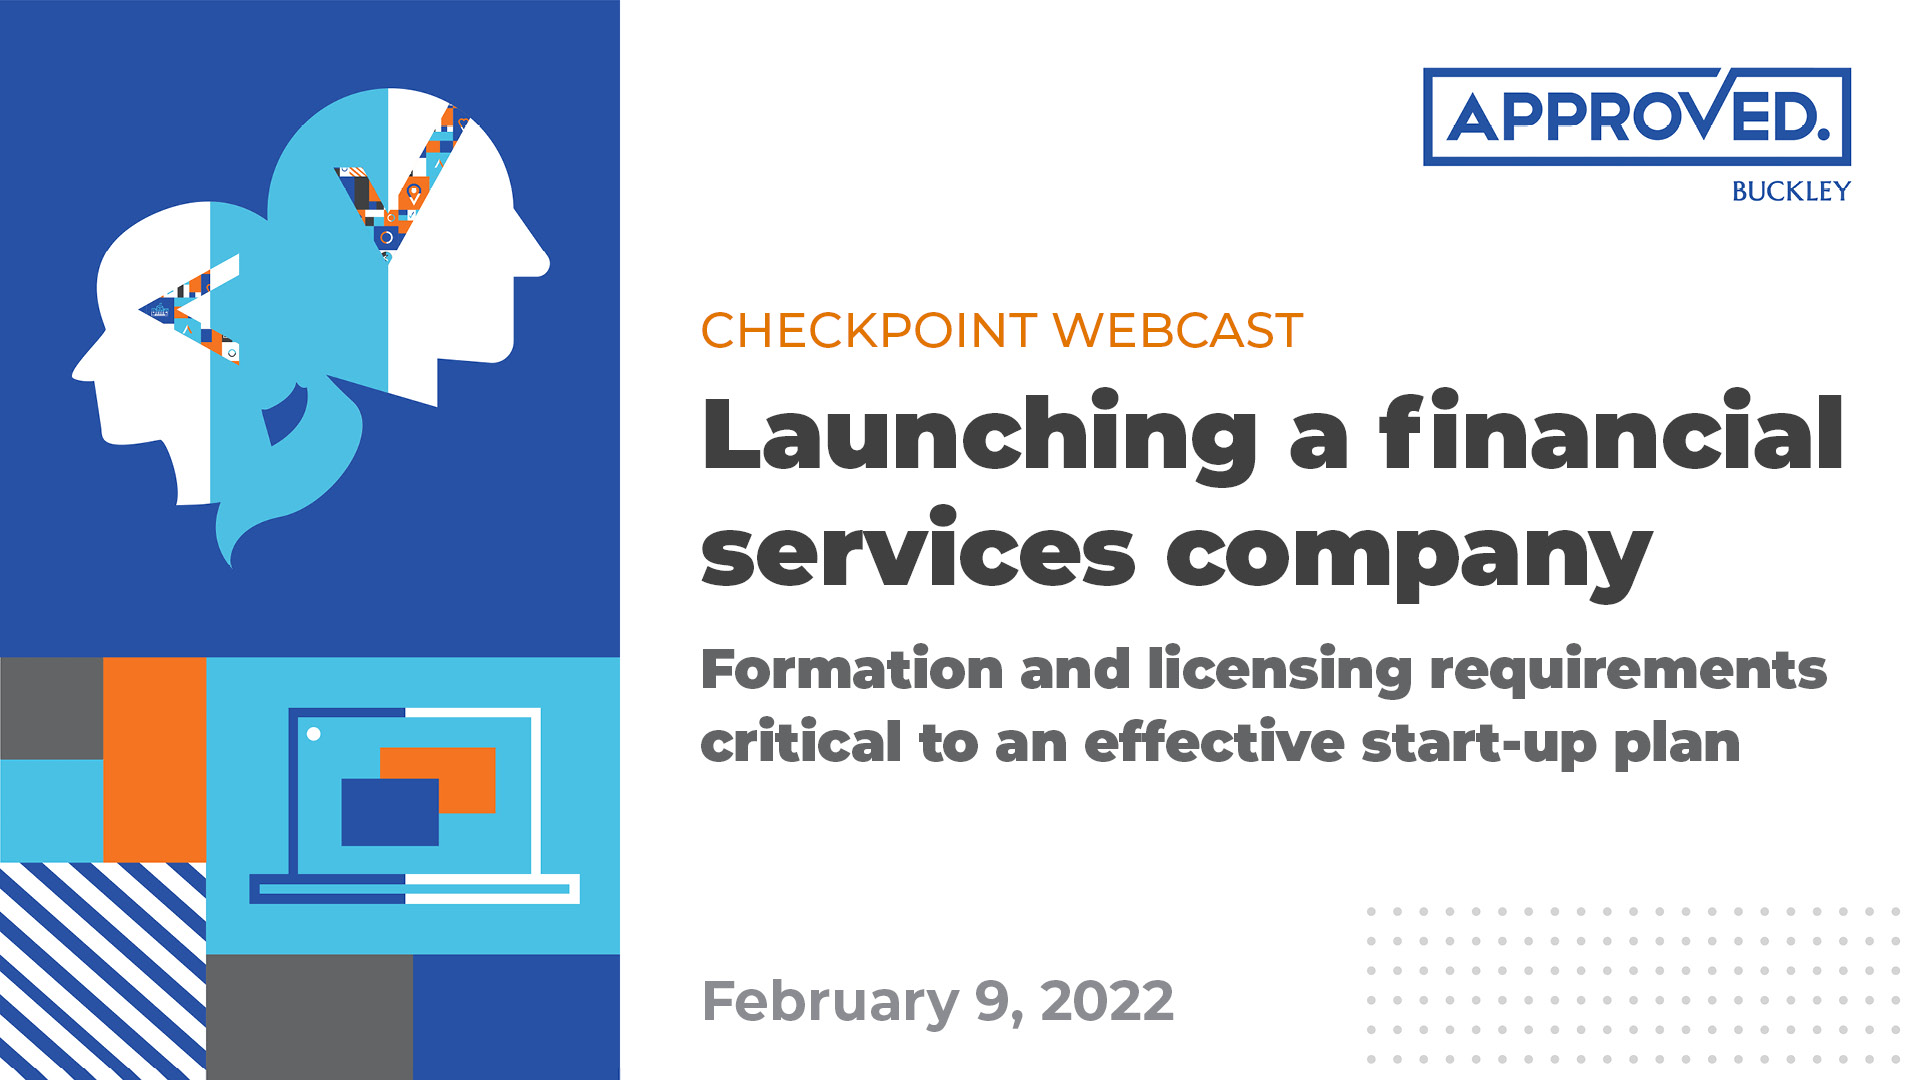 Launching a Financial Services Company | APPROVED Checkpoint Webcast